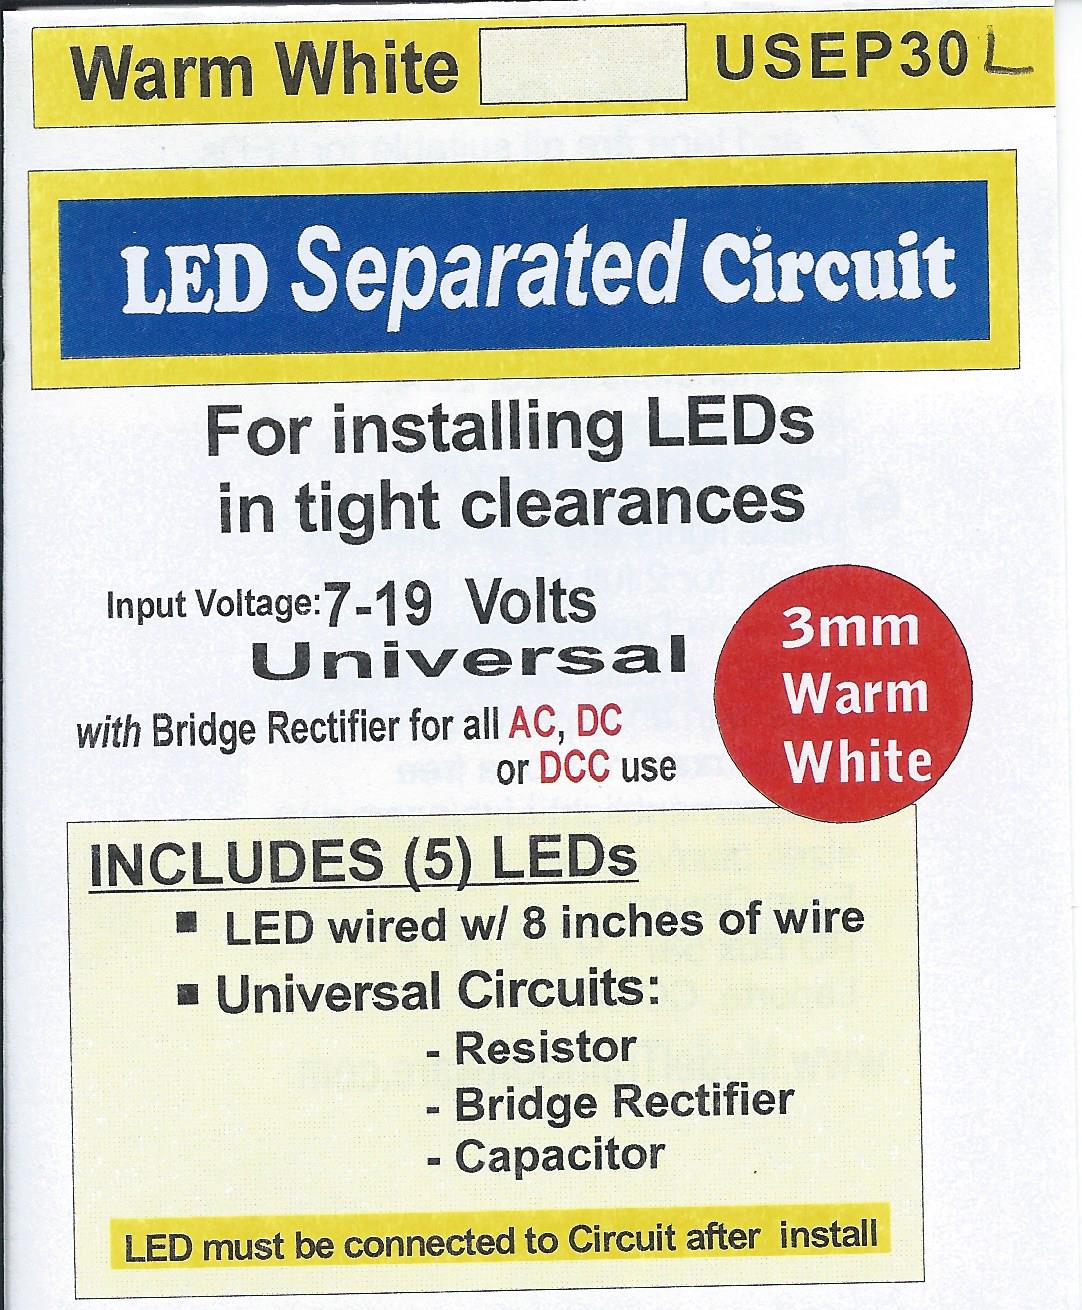 USEP30L 3mm warm white separated circuit LED by Evan designs